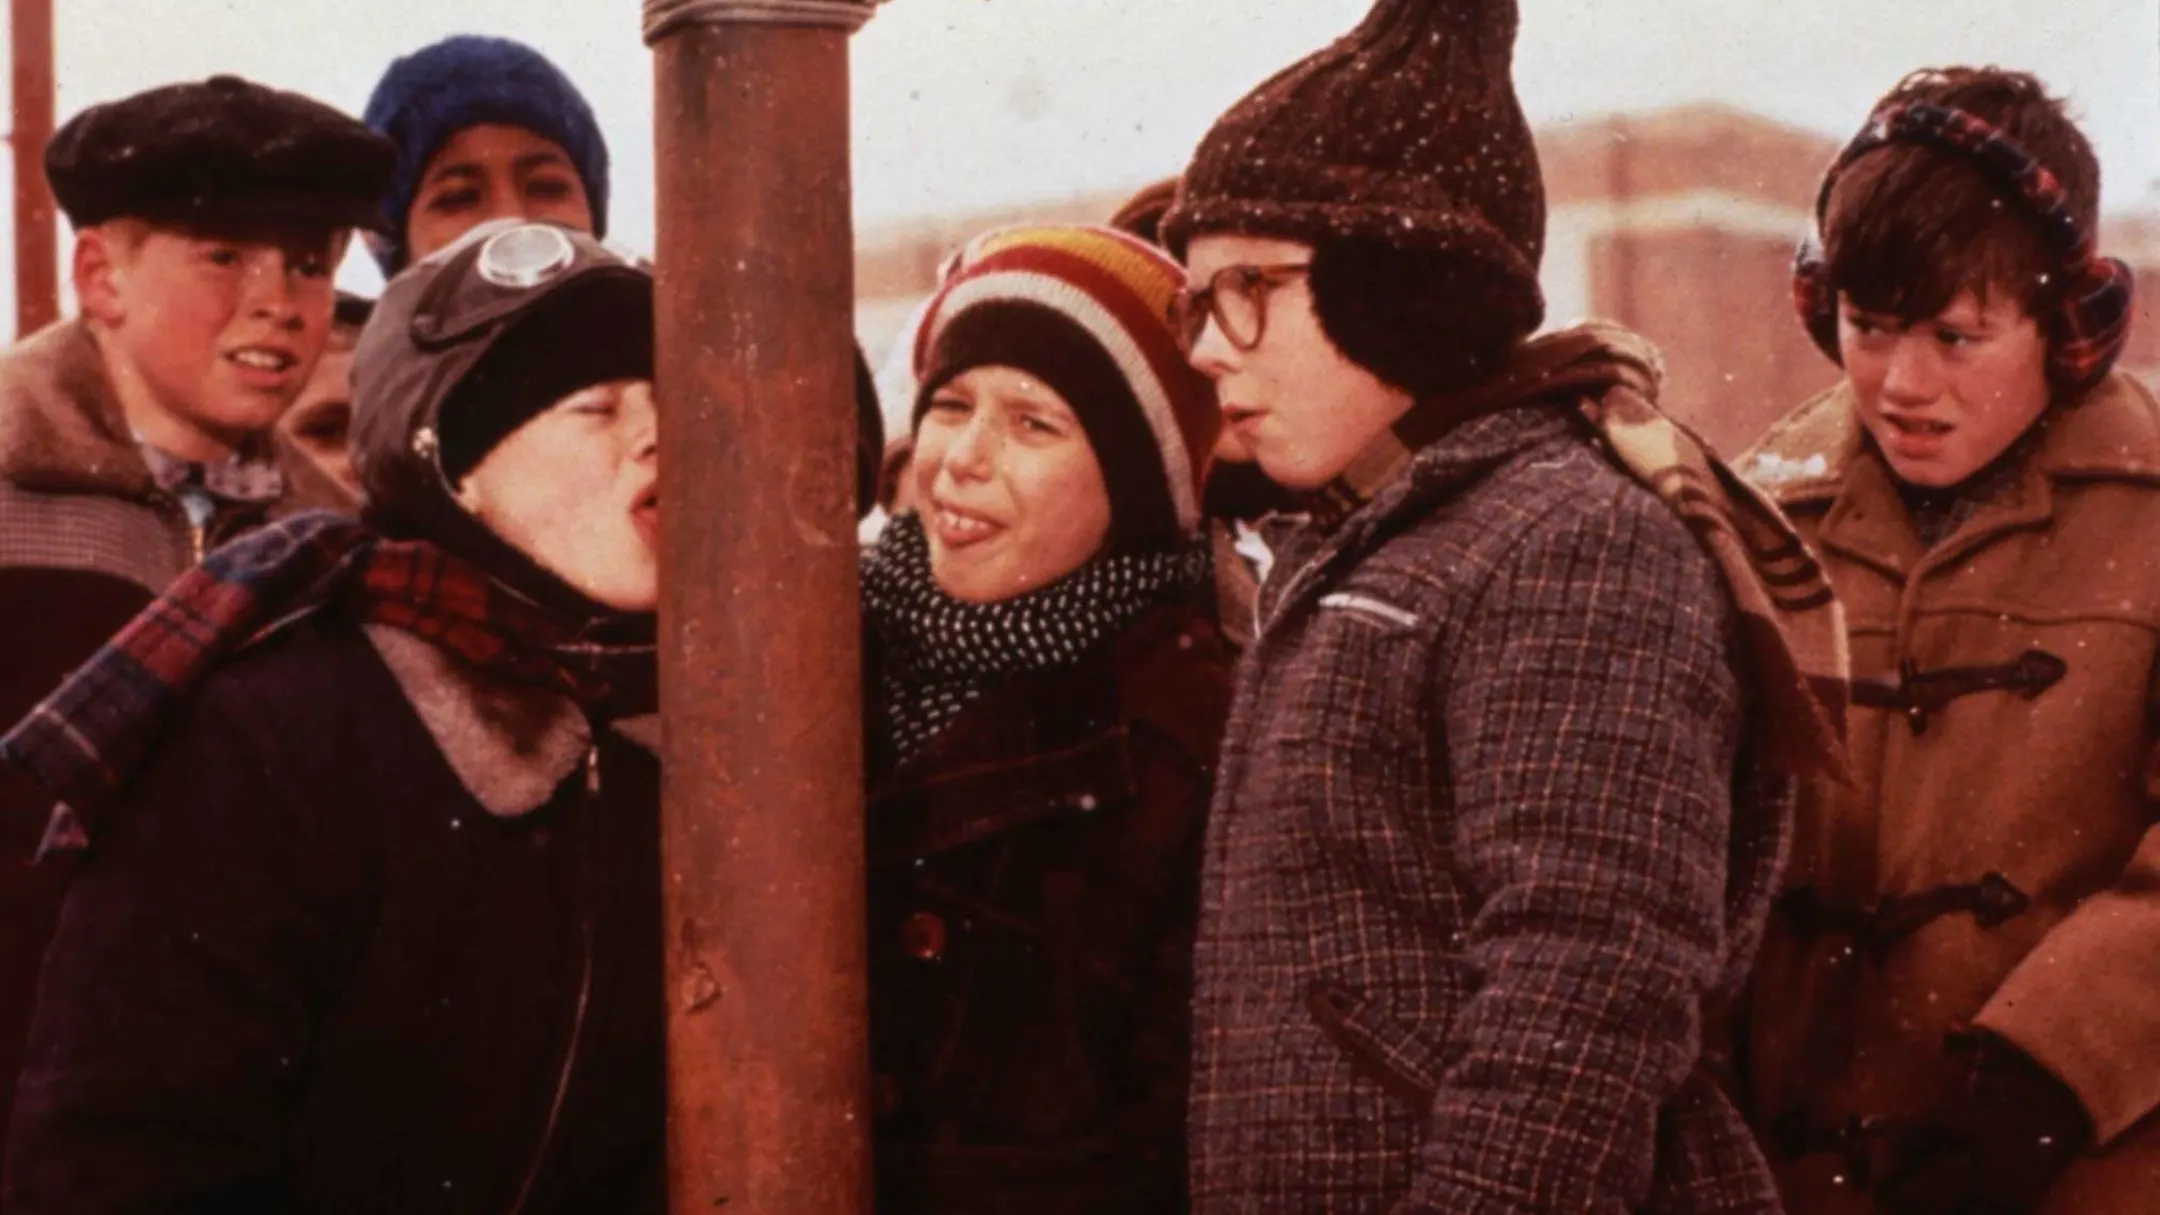 How To Watch “A Christmas Story” Marathon in 2023 on Roku, Fire TV, Apple TV, & More